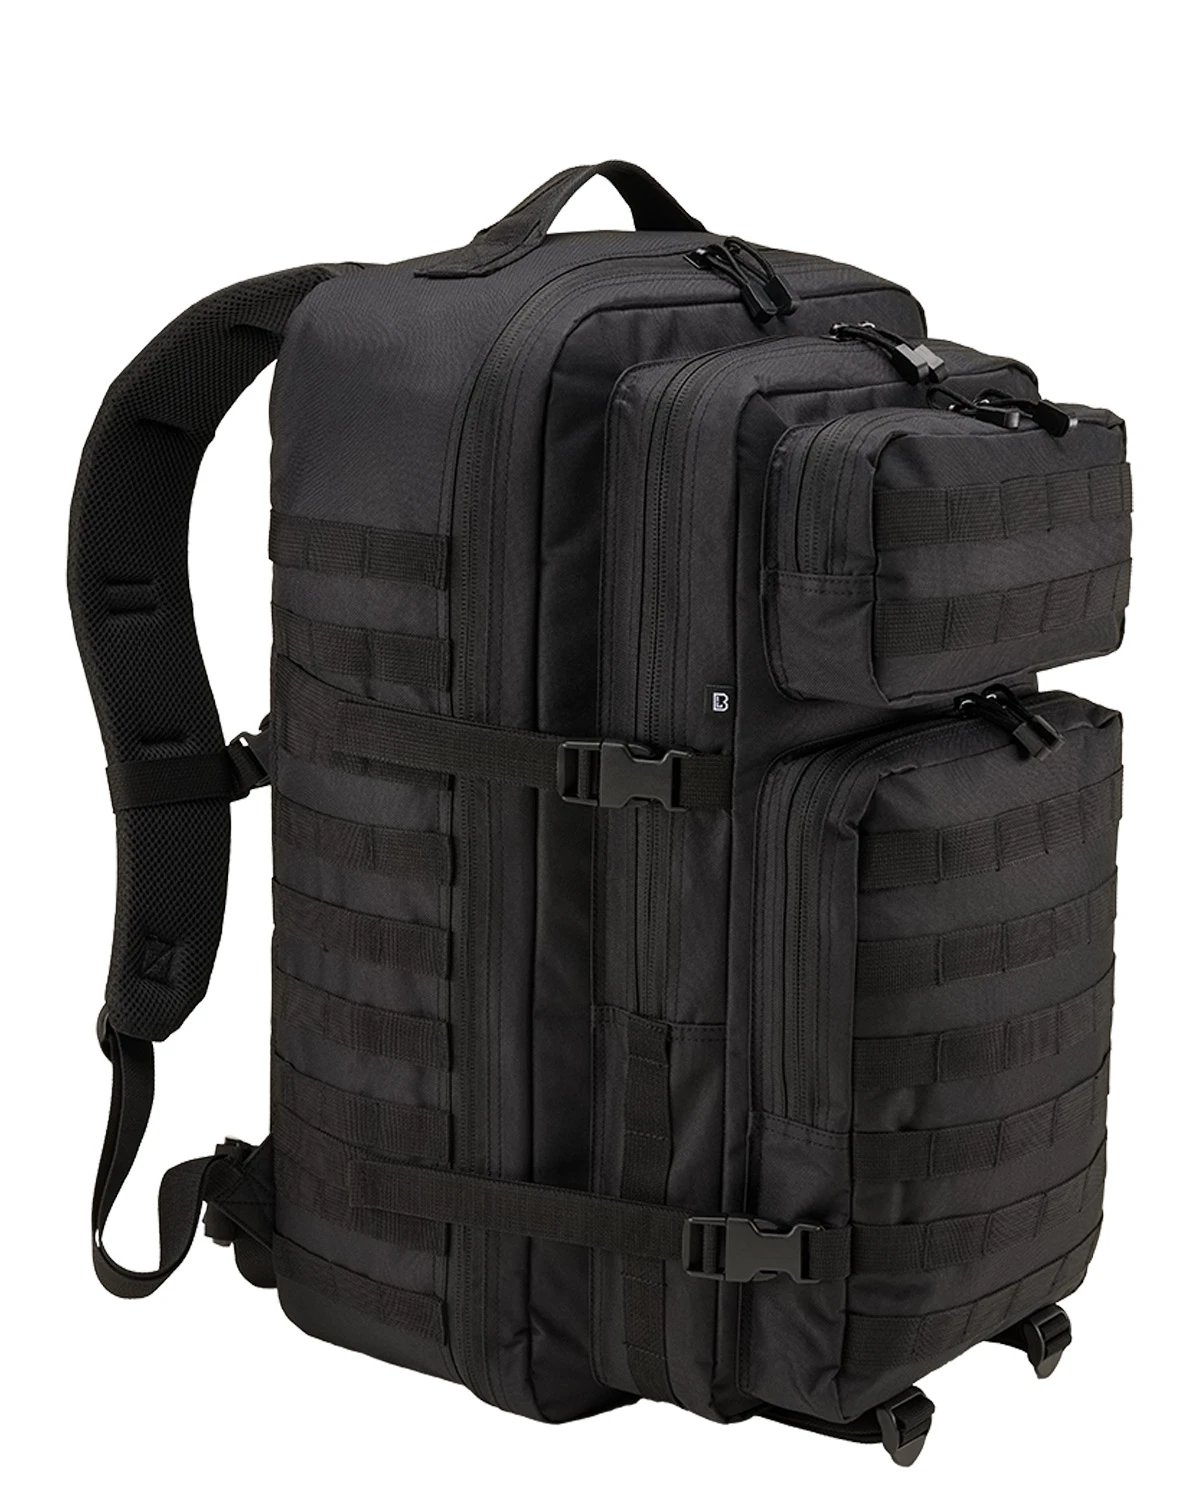 MOLLE Backpacks, MOLLE Packs, MOLLE